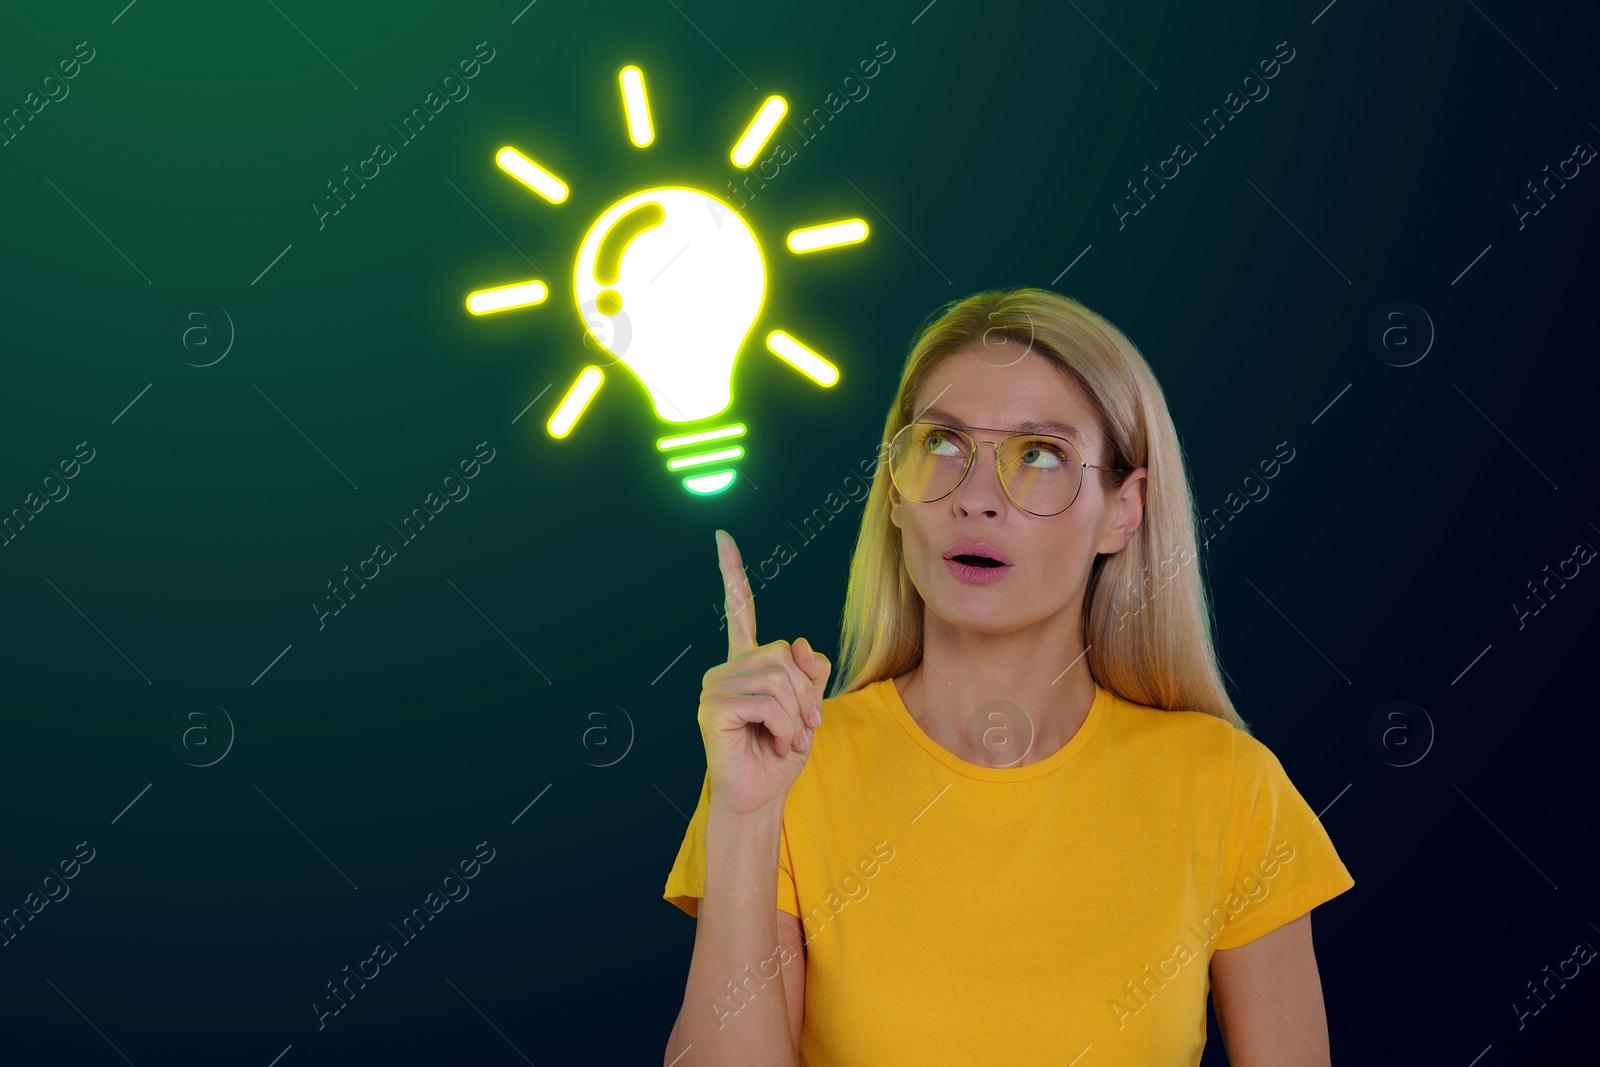 Image of Idea generation. Woman and illustration of light bulb on dark green background